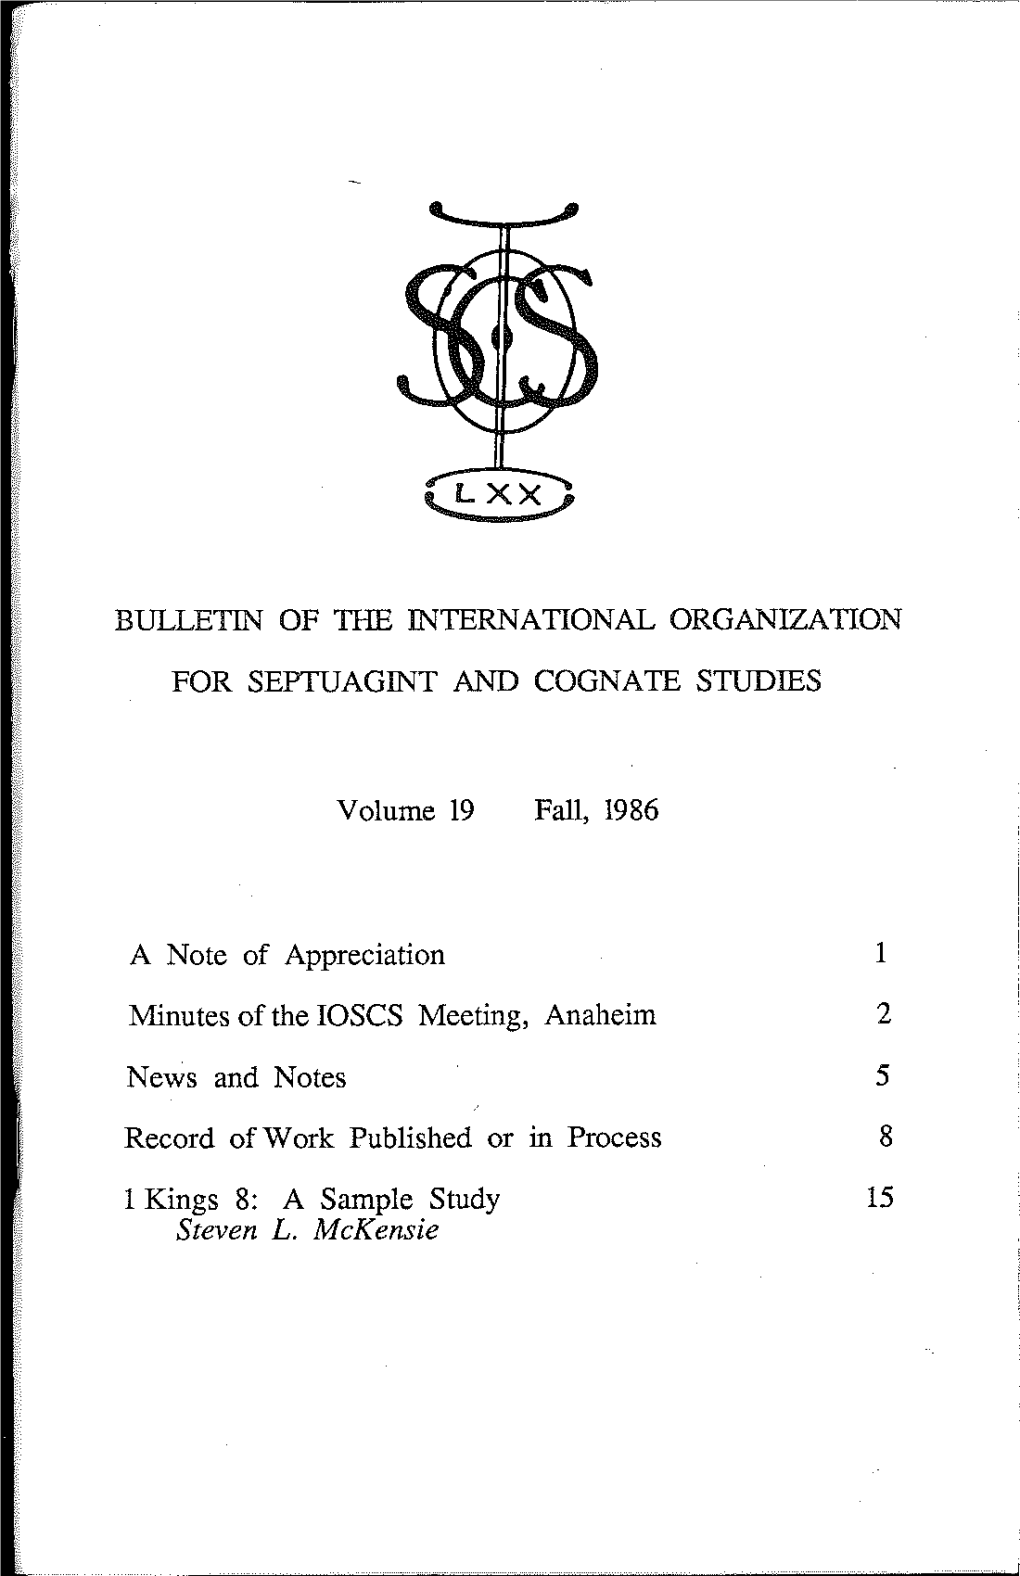 Bulletin of the International Organization for Septuagint And